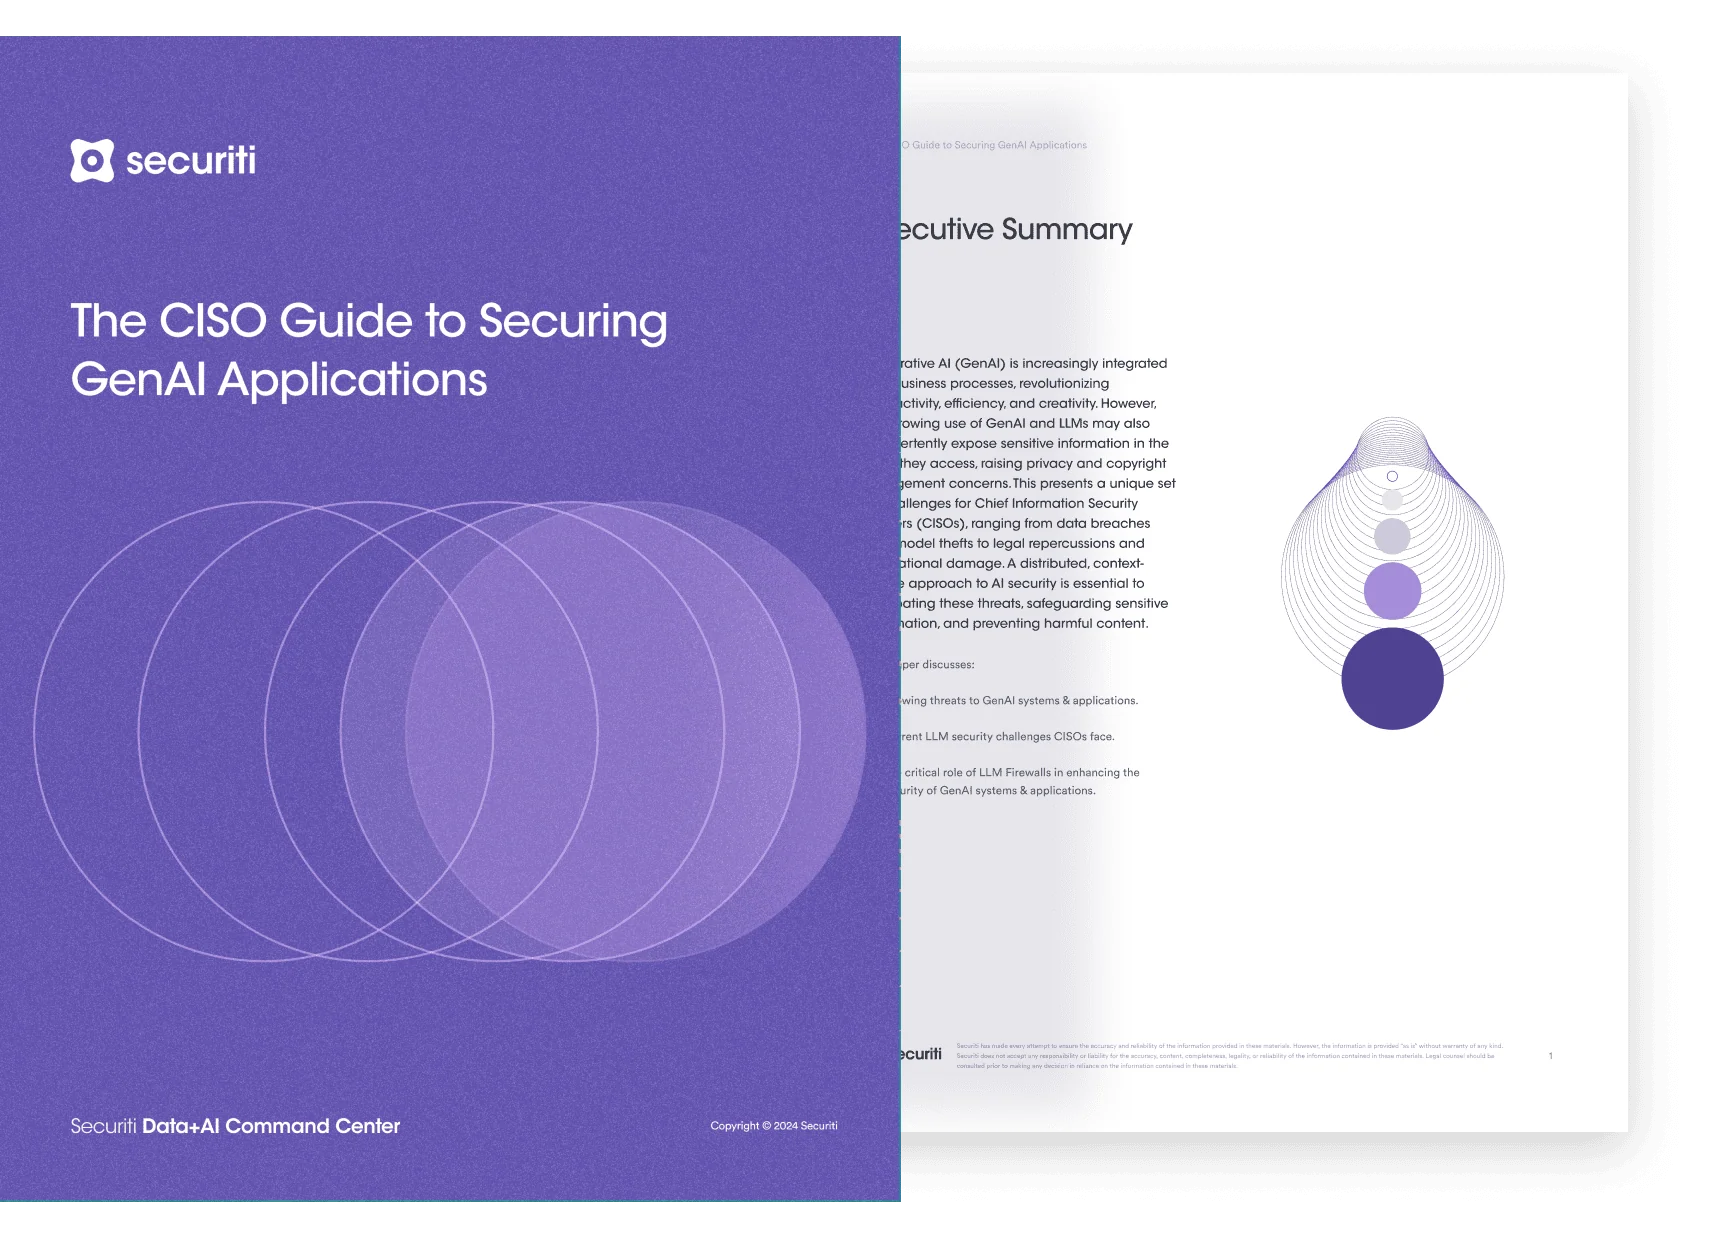 The CISO Guide for Securing Gen AI Applications